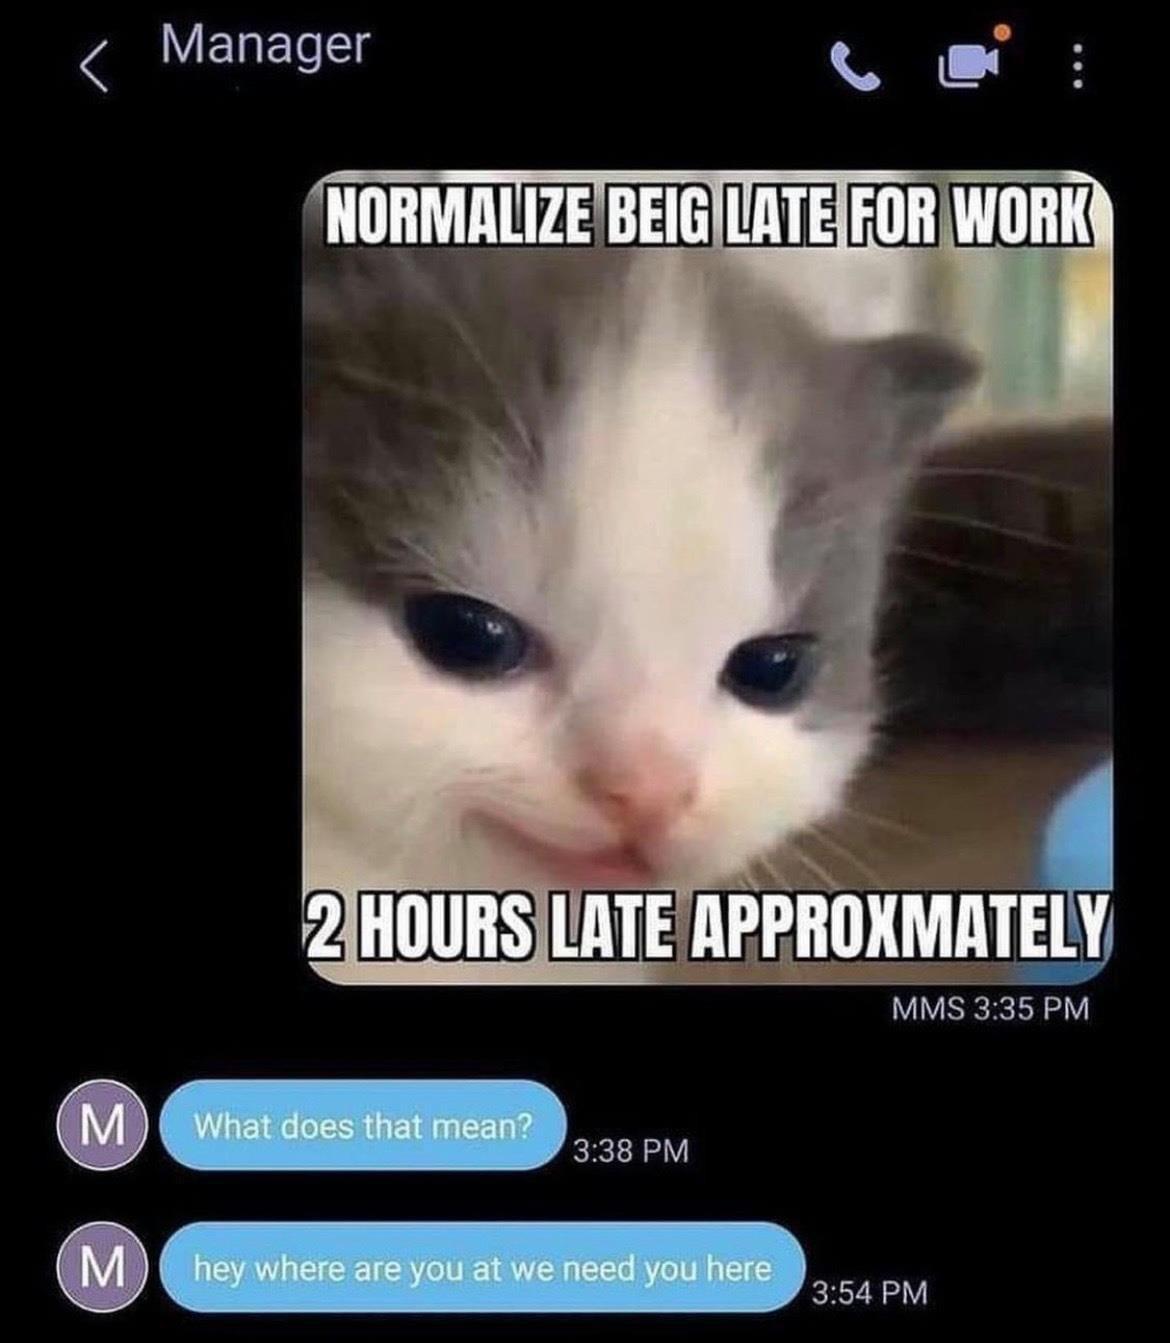 normalize being late to work meme - Manager Normalize Beig Late For Work 2 Hours Late Approxmately Mms M What does that mean? M hey where are you at we need you here